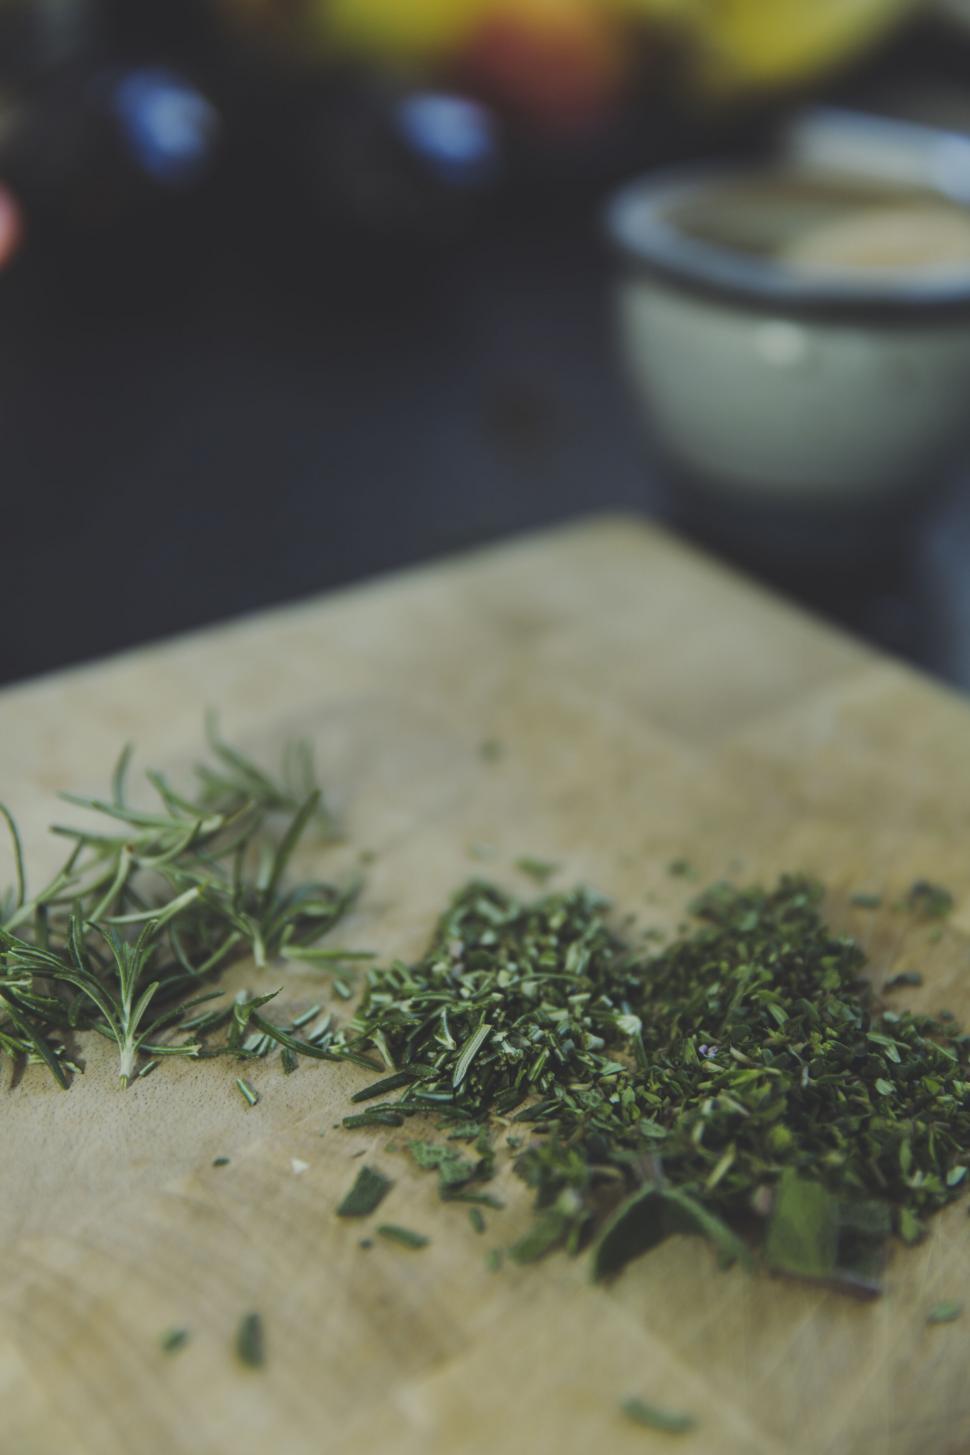 Free Image of Chopped herbs on a wooden cutting board 